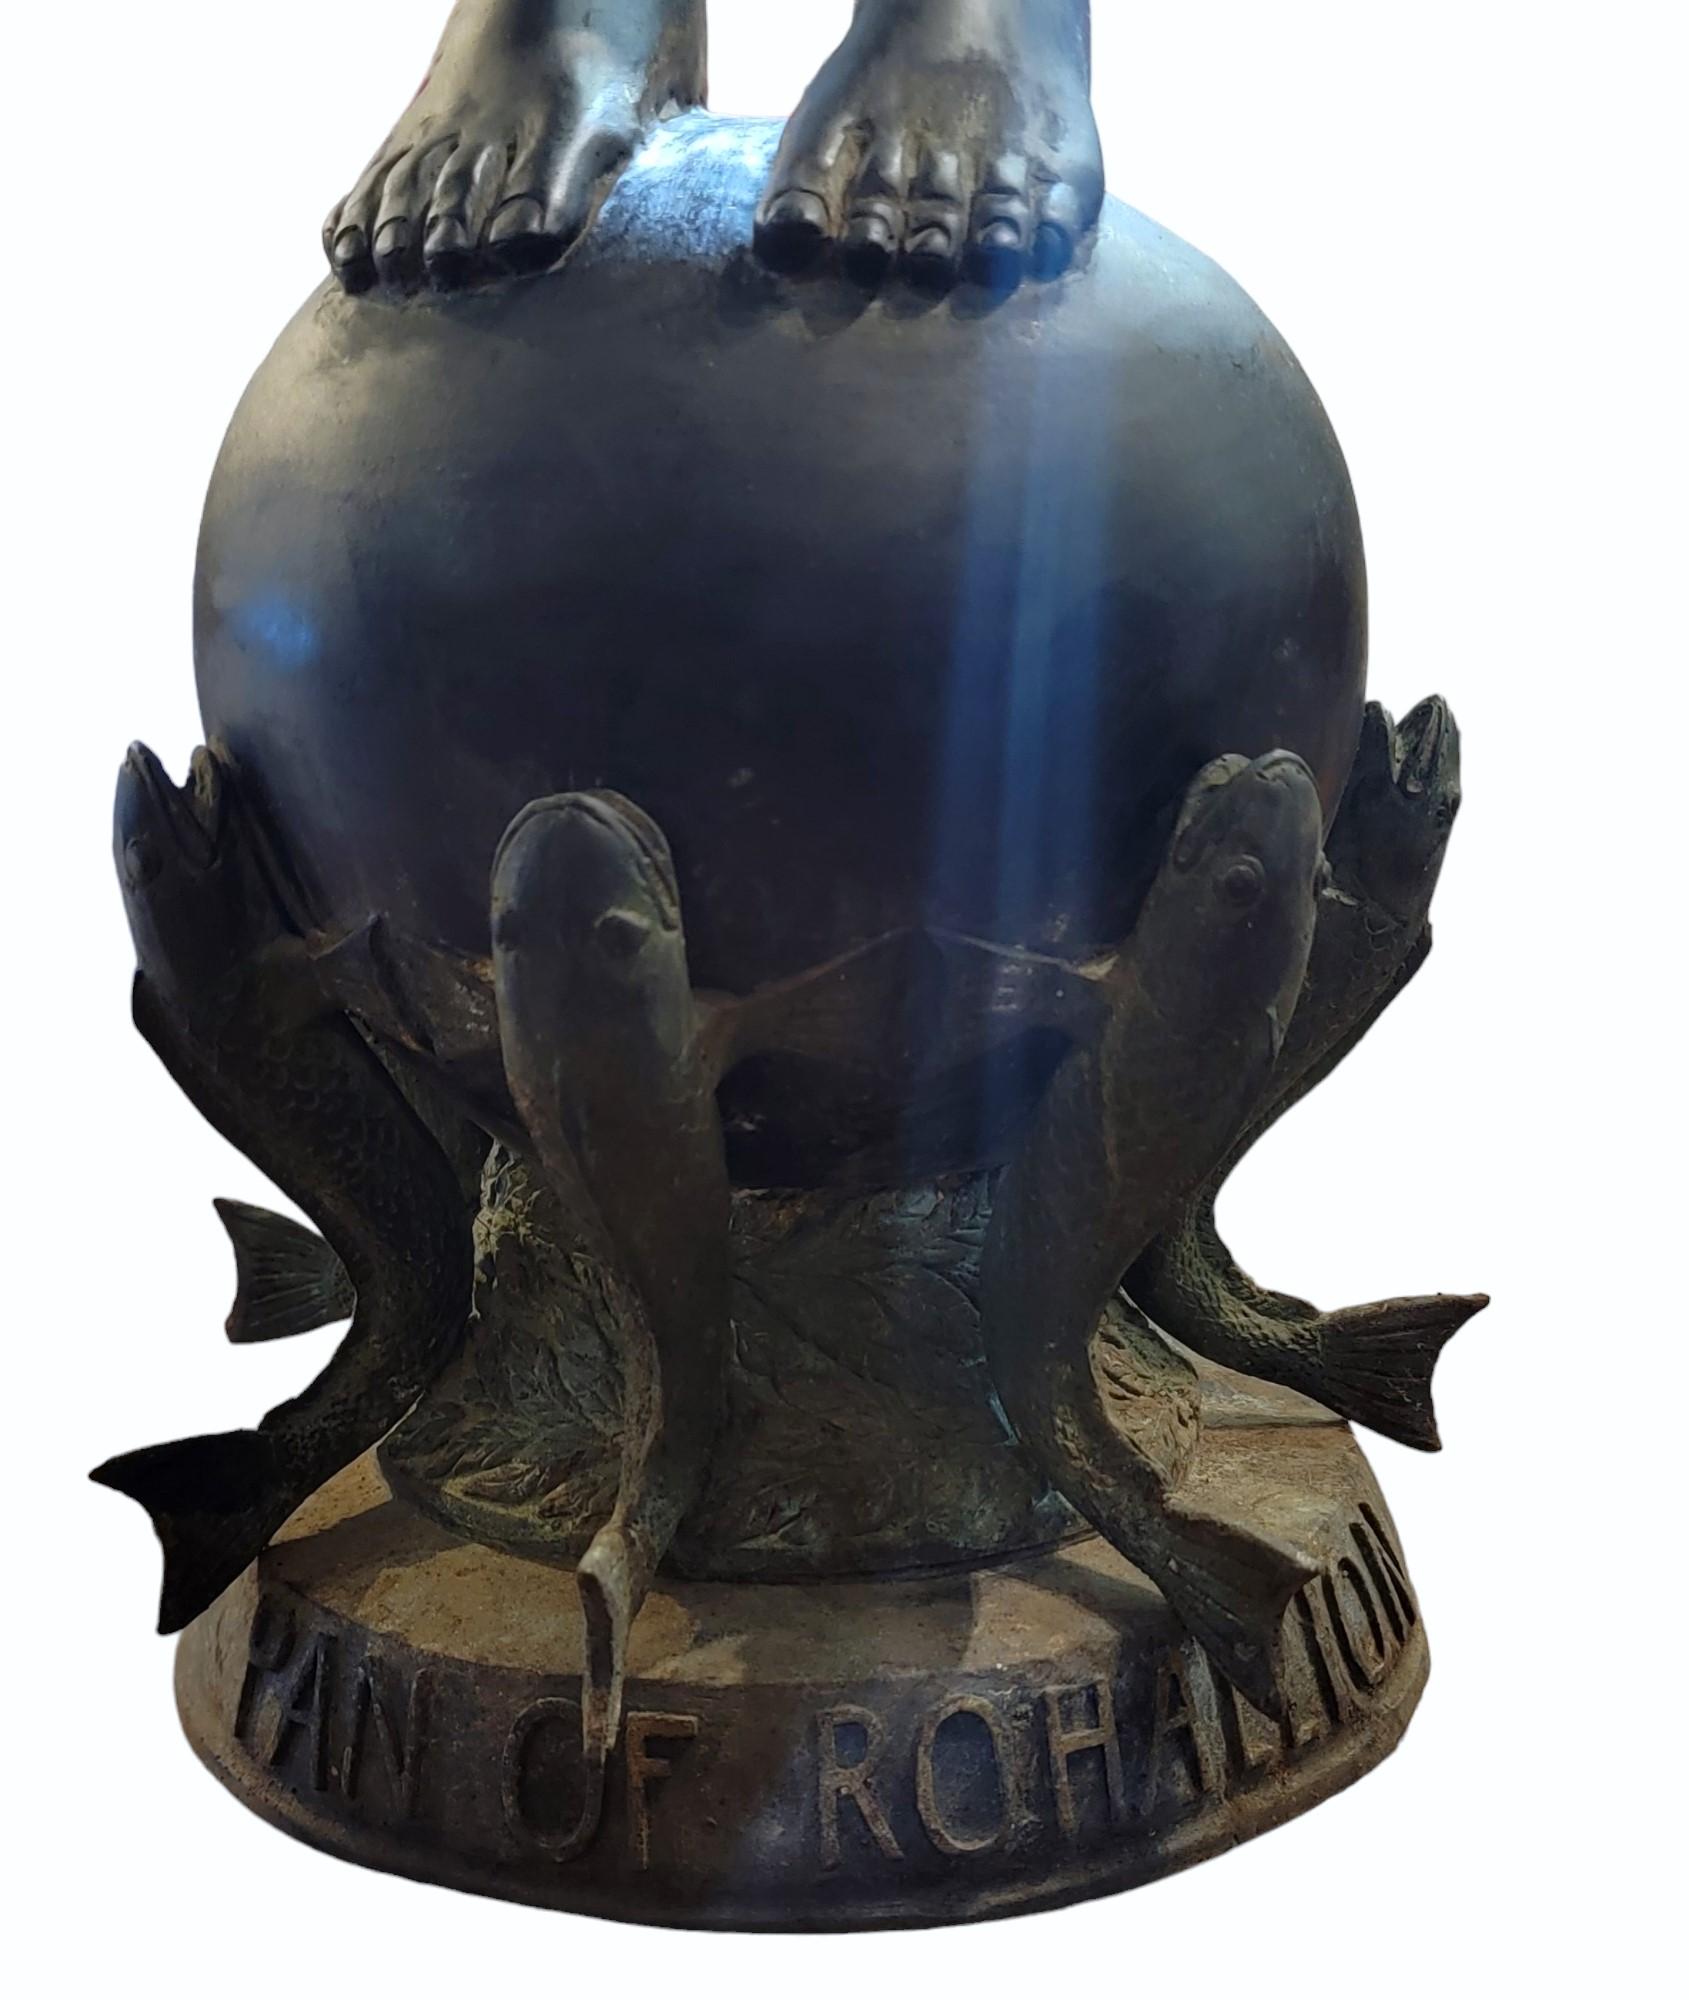 American Pan Of Rohallian Fountain Sculpture For Sale